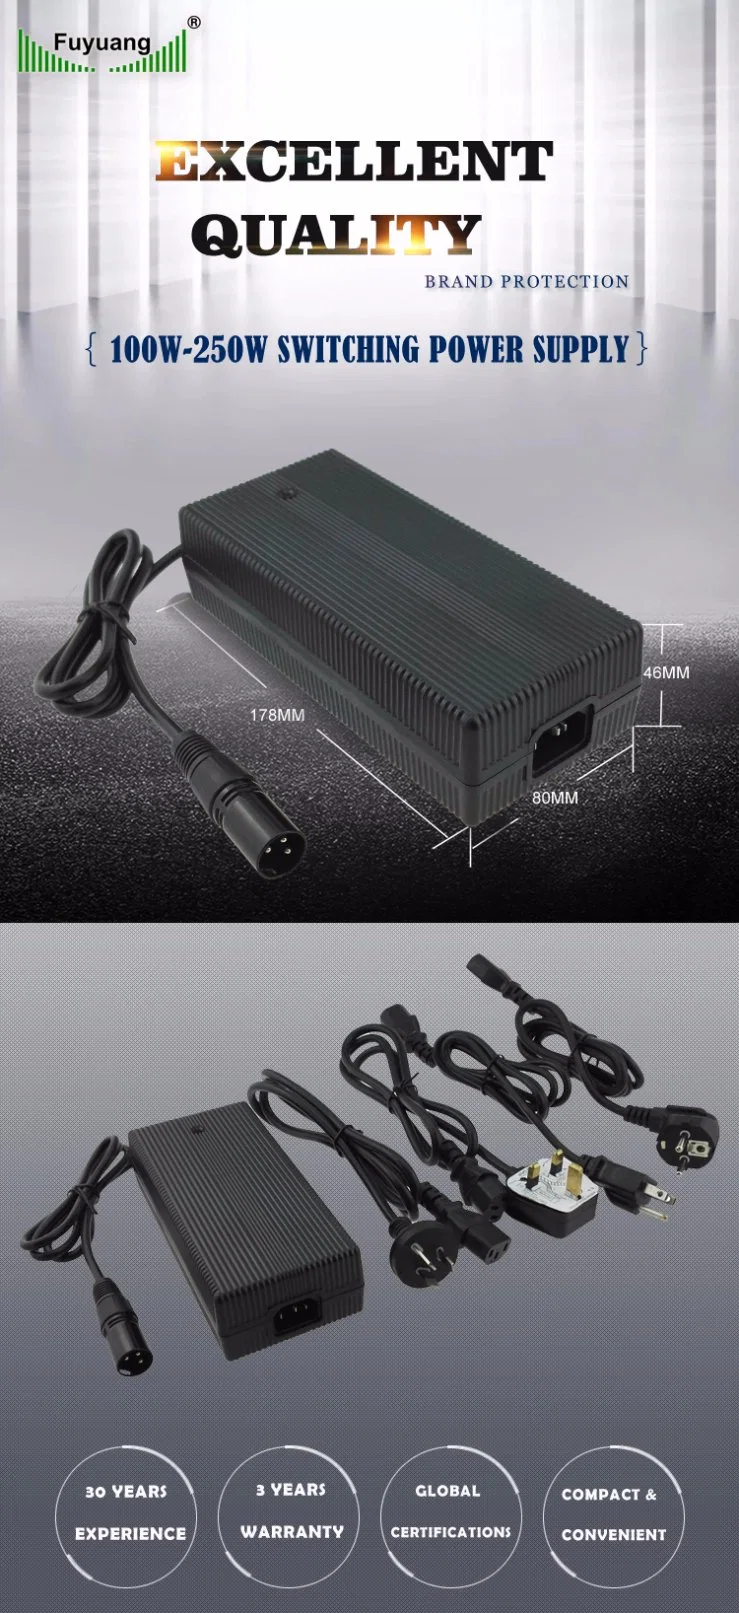 2 Cell Lead Acid Charger 29V2a (FY2902000) Full Automatic Intelligent 24V 10A 11A 12A 13A 14A 15A Smart/ Universal Lead Acid Battery Charger 29.4V